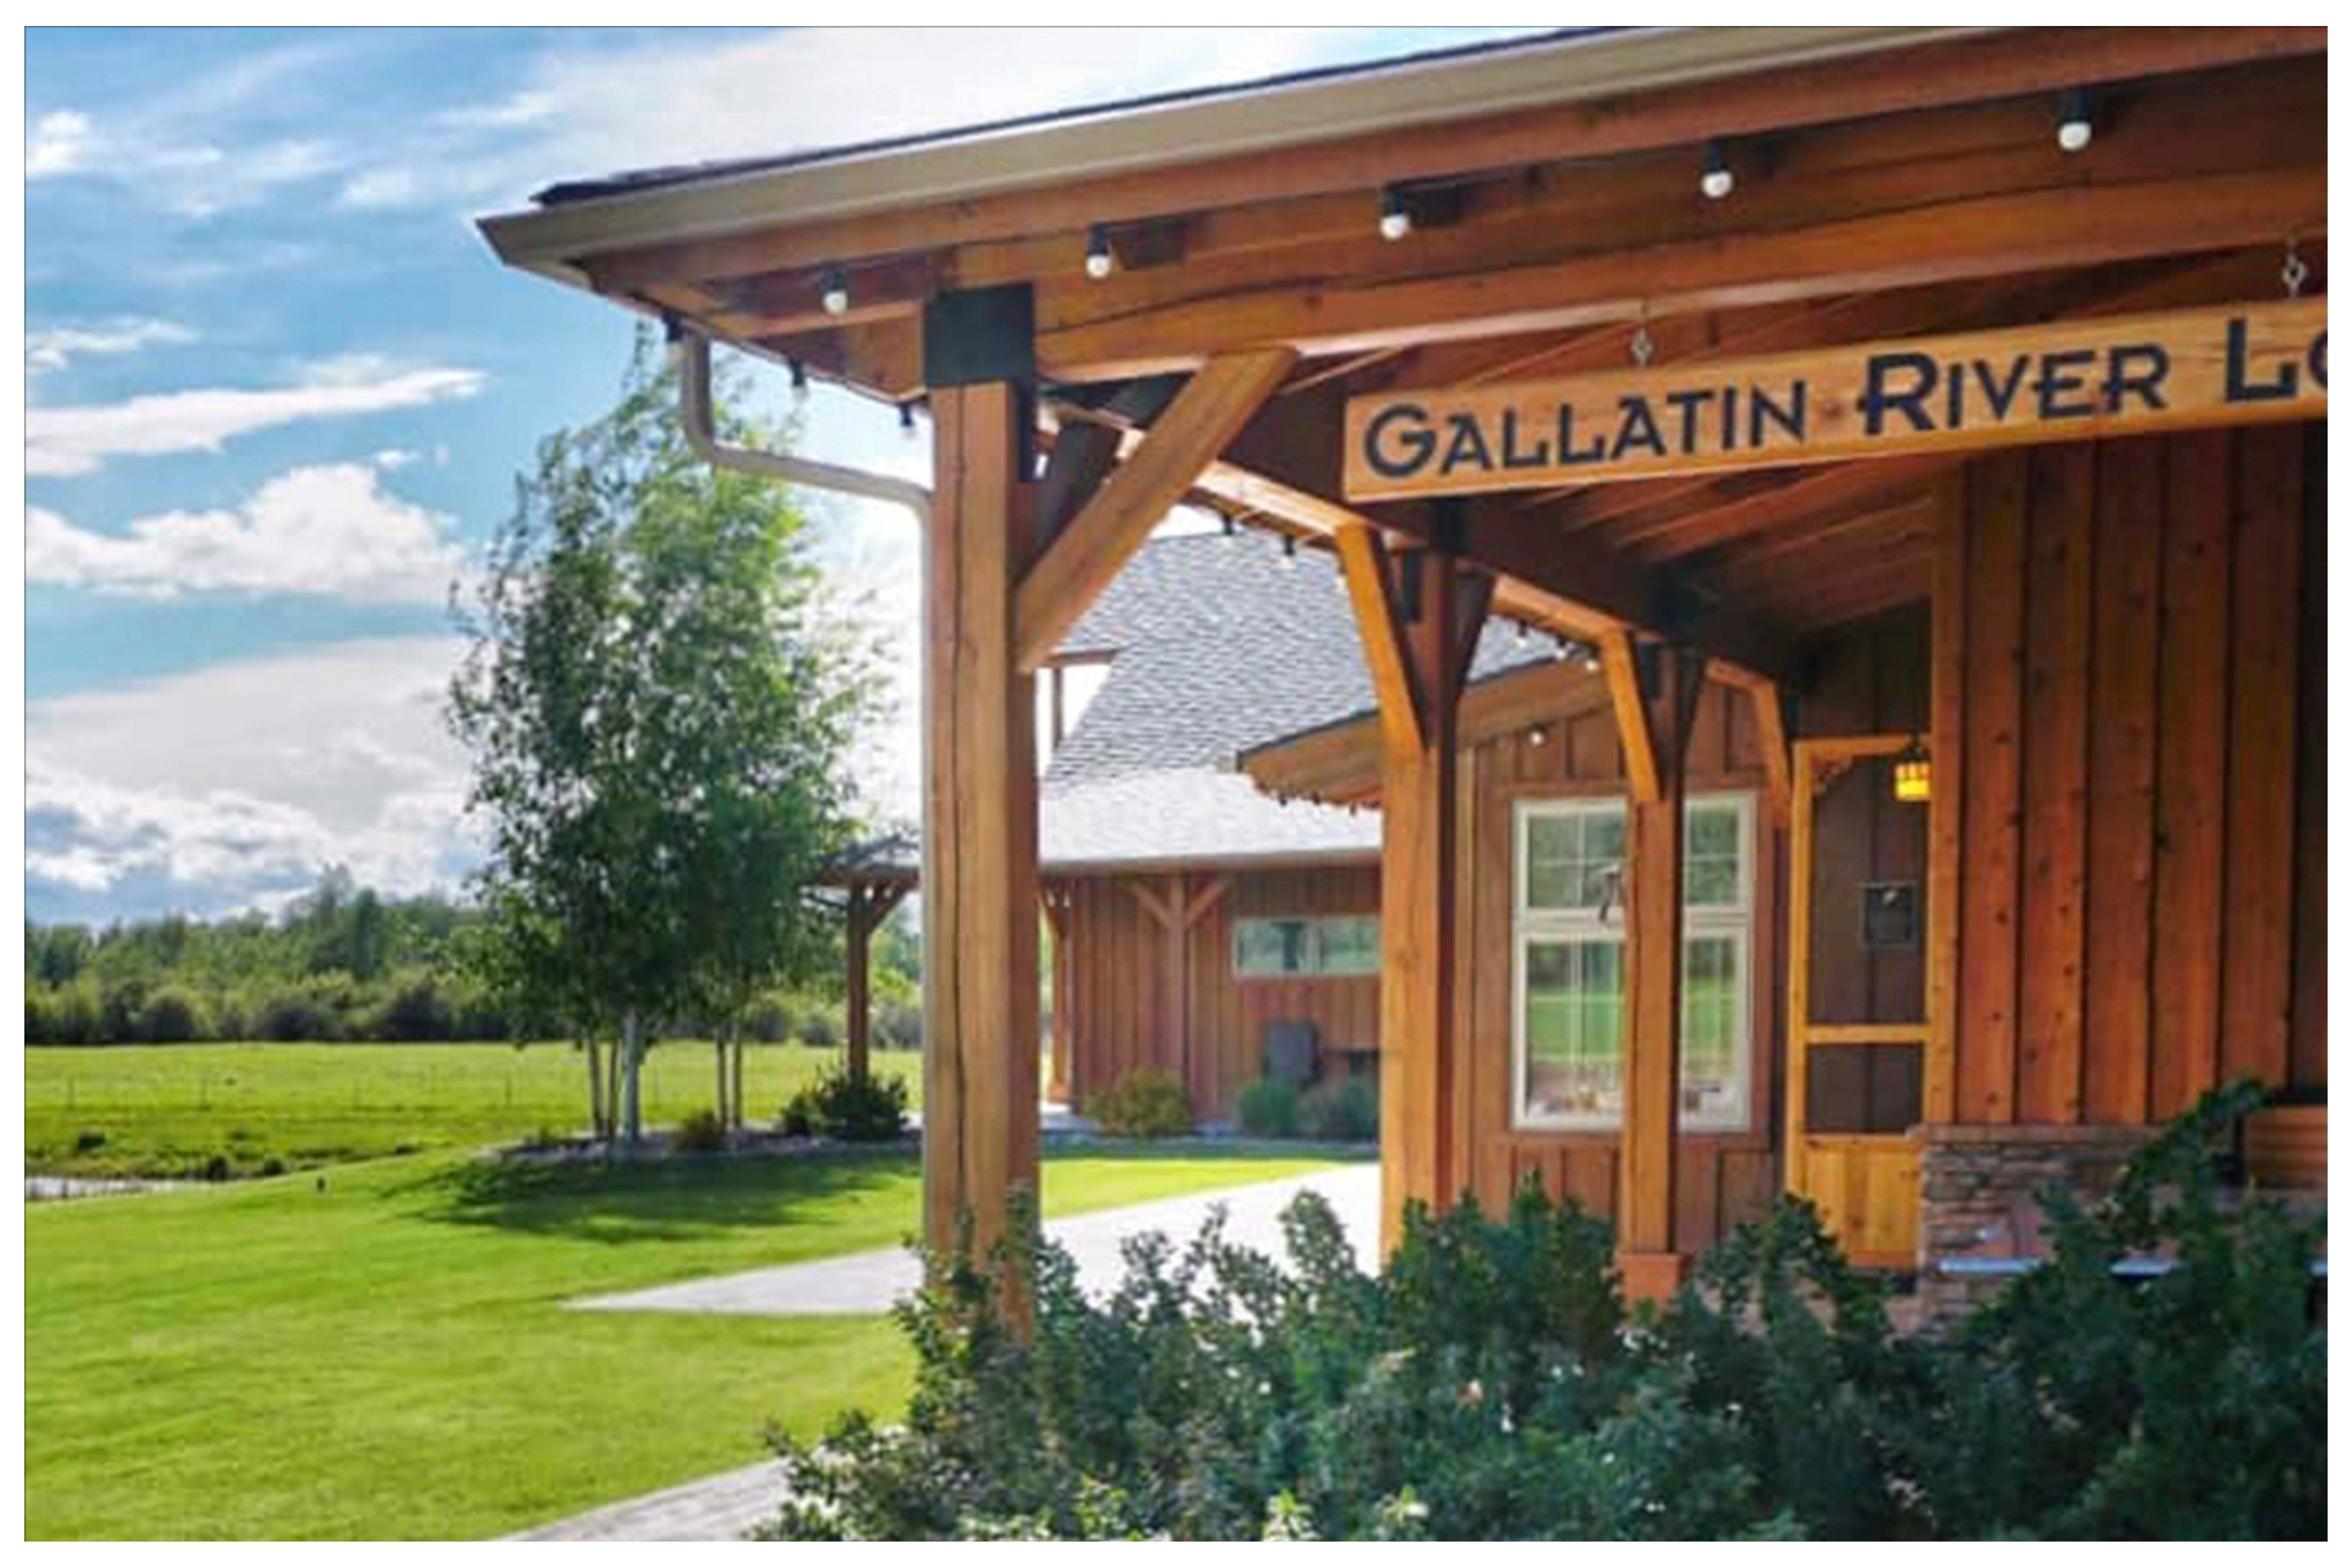 the outside of the gallatin river lodge in bozeman montana